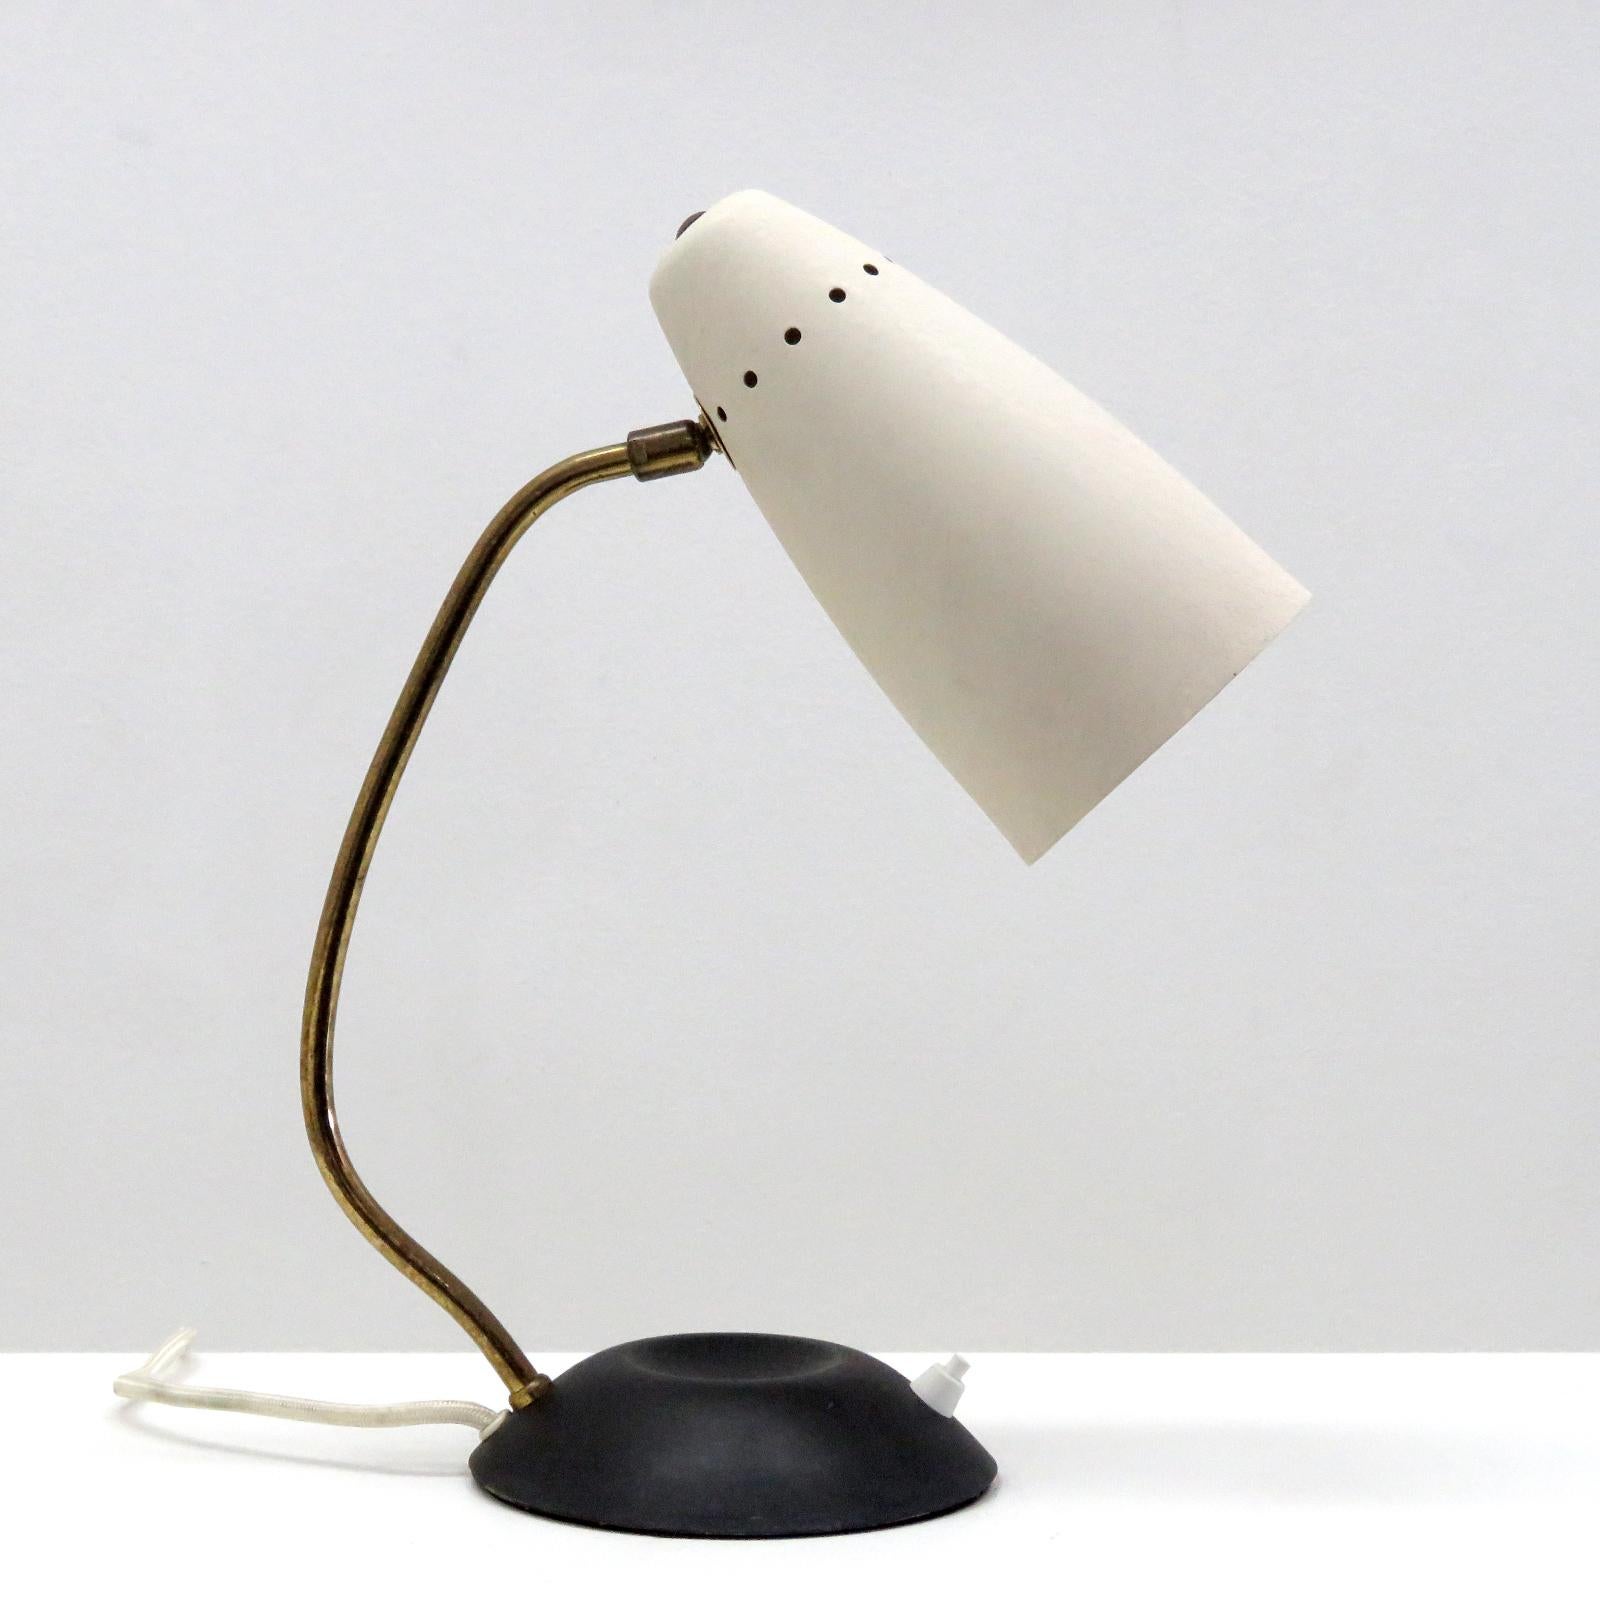 Elegant articulate table lamp, with matte black metal base, curved brass arm, orientable aluminium shade in textured ivory, on/off switch on the base, wired for US standards, one E27 socket, max. wattage 75W, bulbs provided as a one time courtesy.